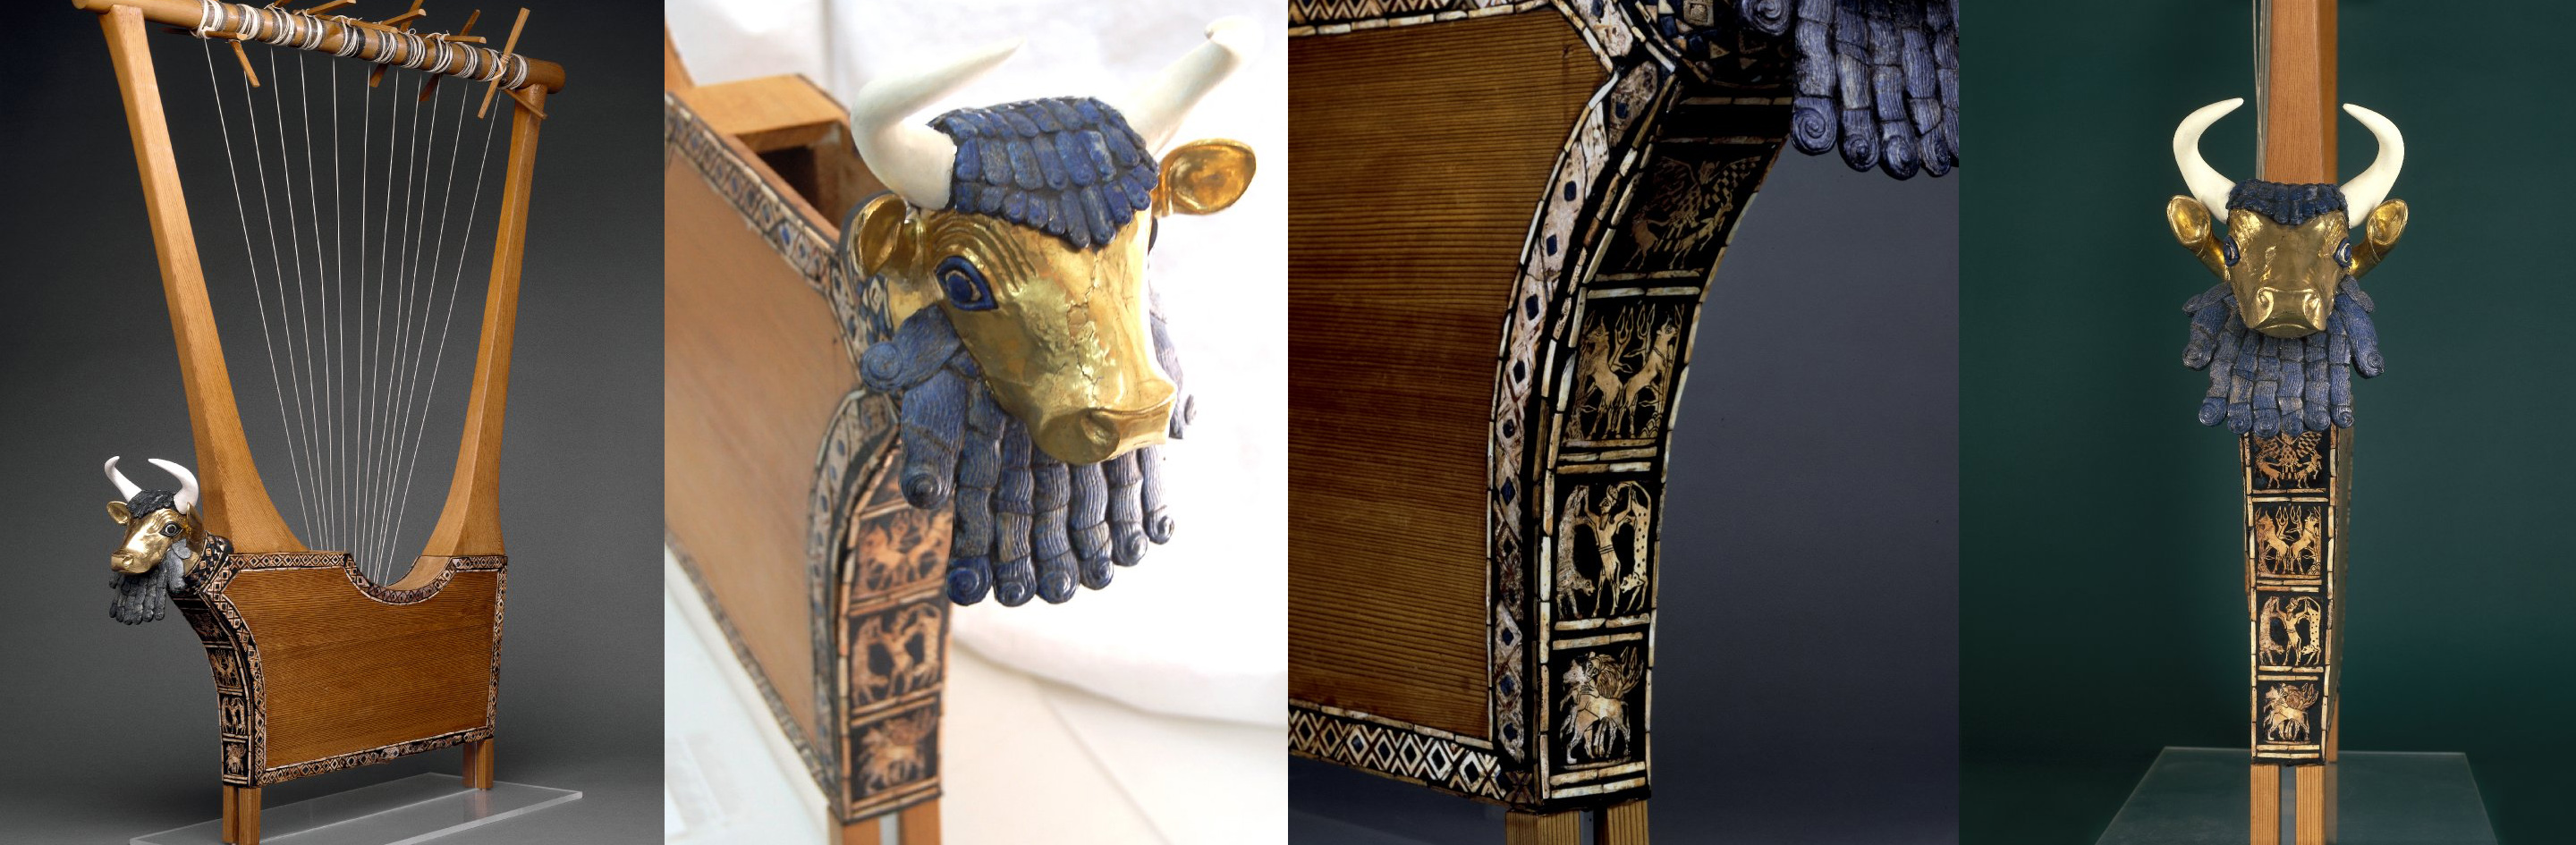 Queen's Lyre (reconstruction), 2600 B.C.E., wooden parts, pegs and string are modern; lapis lazuli, shell and red limestone mosaic decoration, set in bitumen and the head (but not the horns) of the bull are ancient; the bull's head in front of the sound box is covered with gold; the eyes are lapis lazuli and shell and the hair and beard are lapis lazuli; panel on front depicts lion-headed eagle between gazelles, bulls with plants on hills, a bull-man between leopards and a lion attacking a bull; edges of the sound-box are decorated with inlay bands; eleven gold-headed pegs for the strings, 112.5 x 73 x 7 cm (body), Ur © Trustees of the British Museum